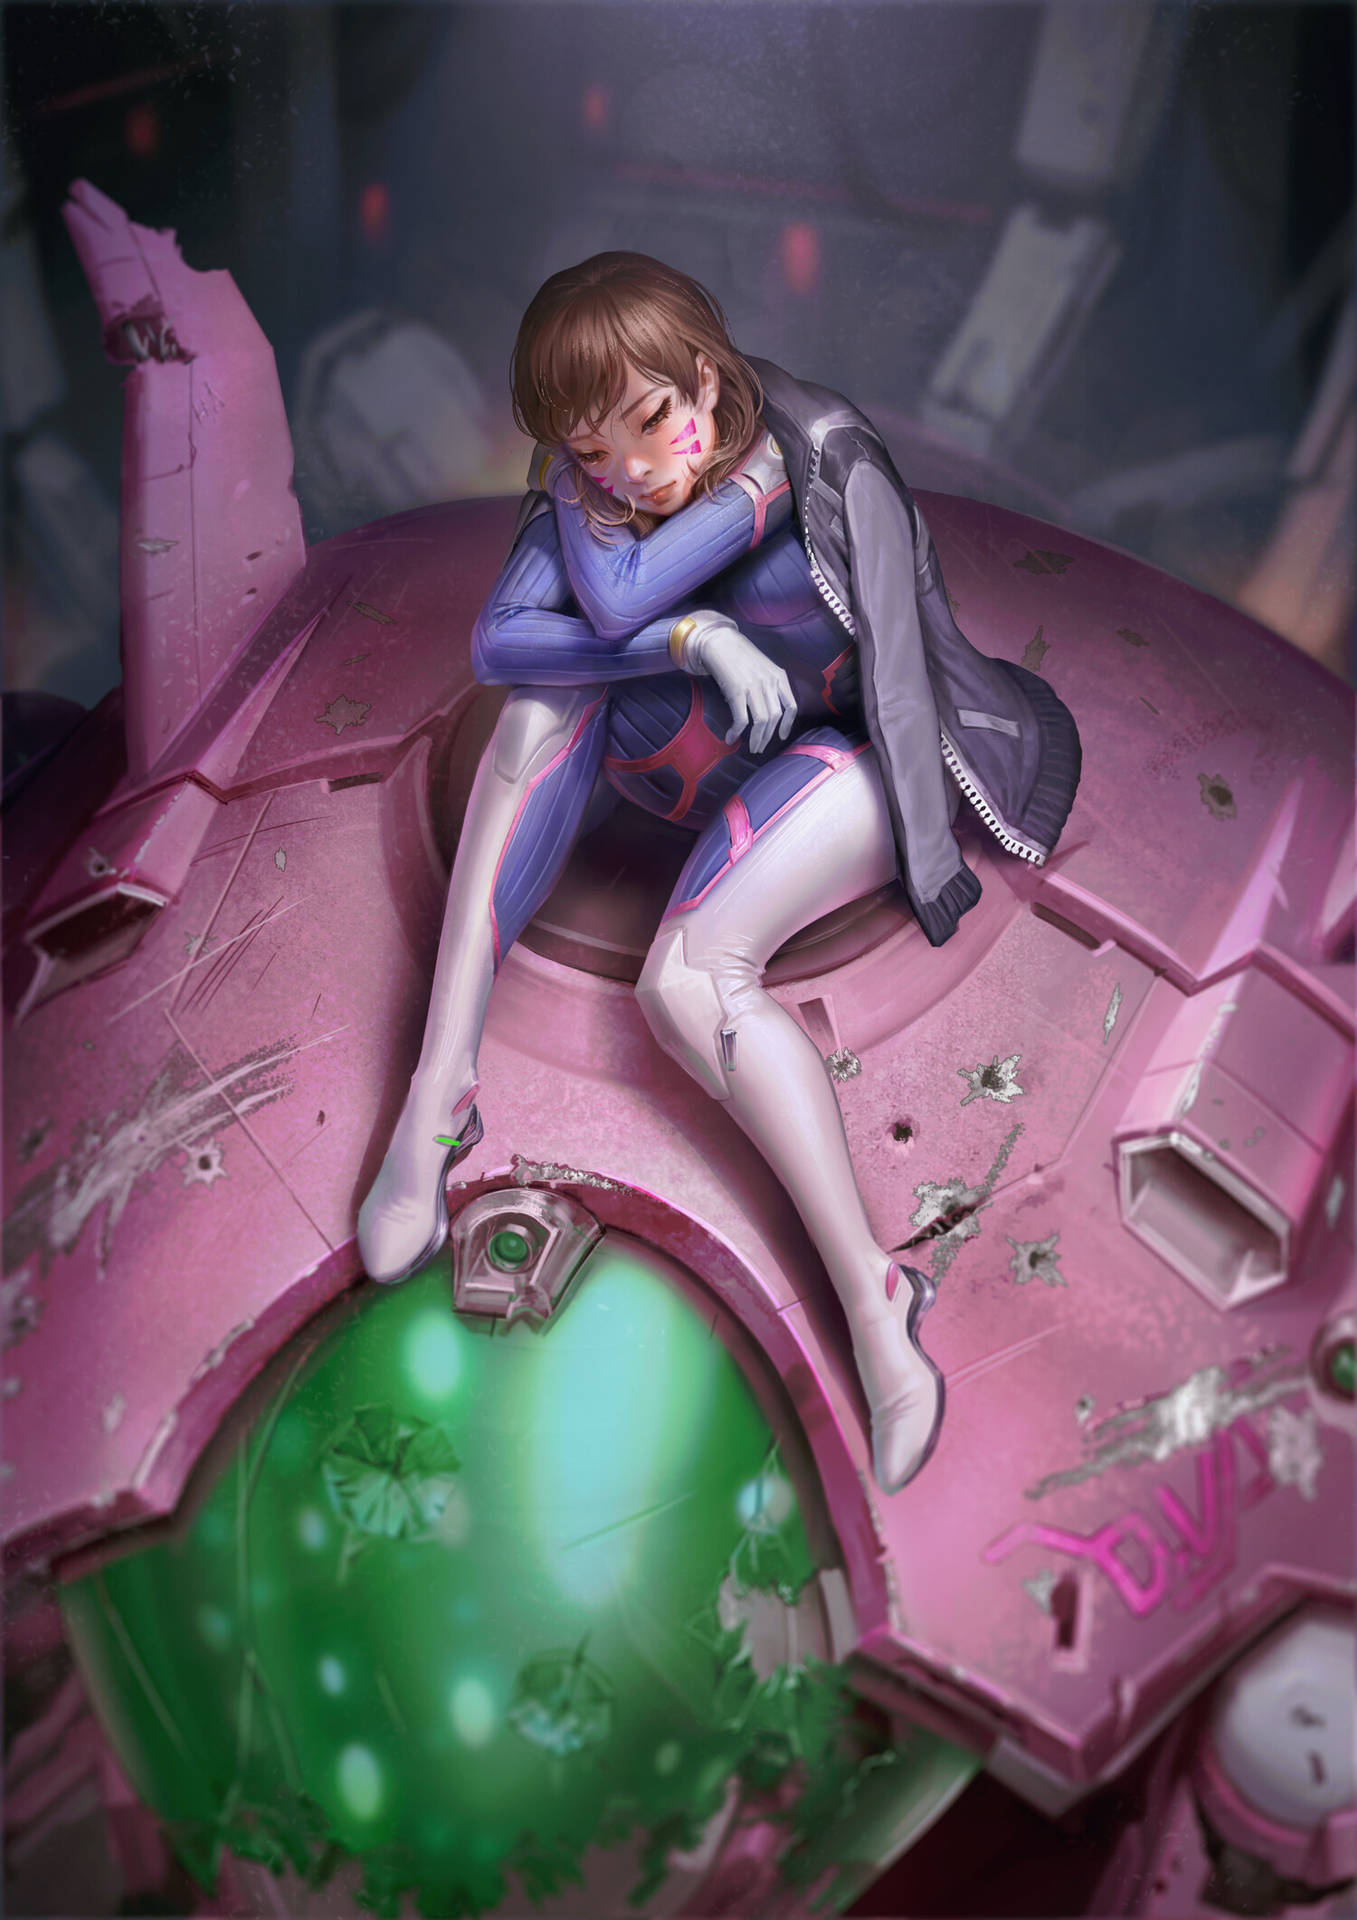 "Dva taking control of the battlefield in her cutting-edge mech suit!" Wallpaper